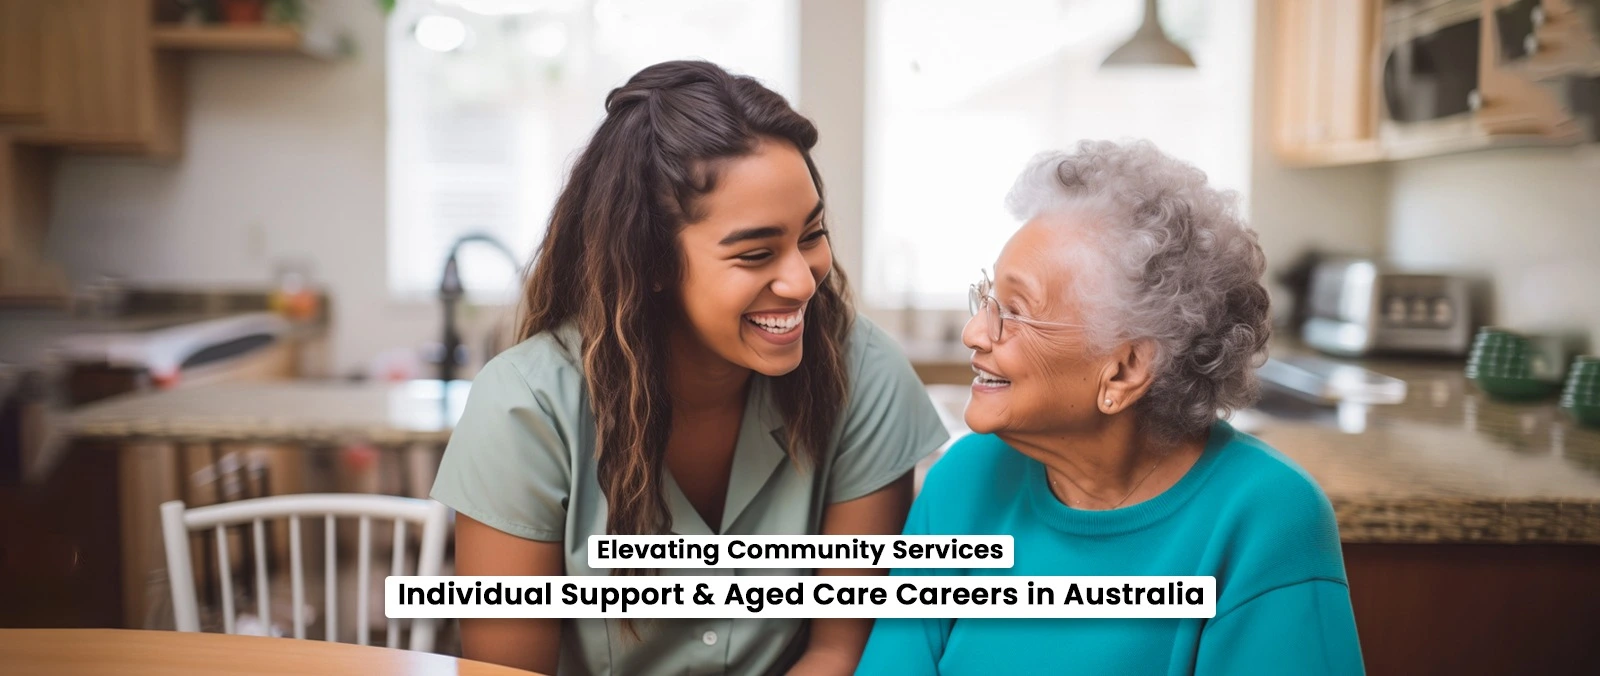 Individual Support & Aged Care Careers in Australia